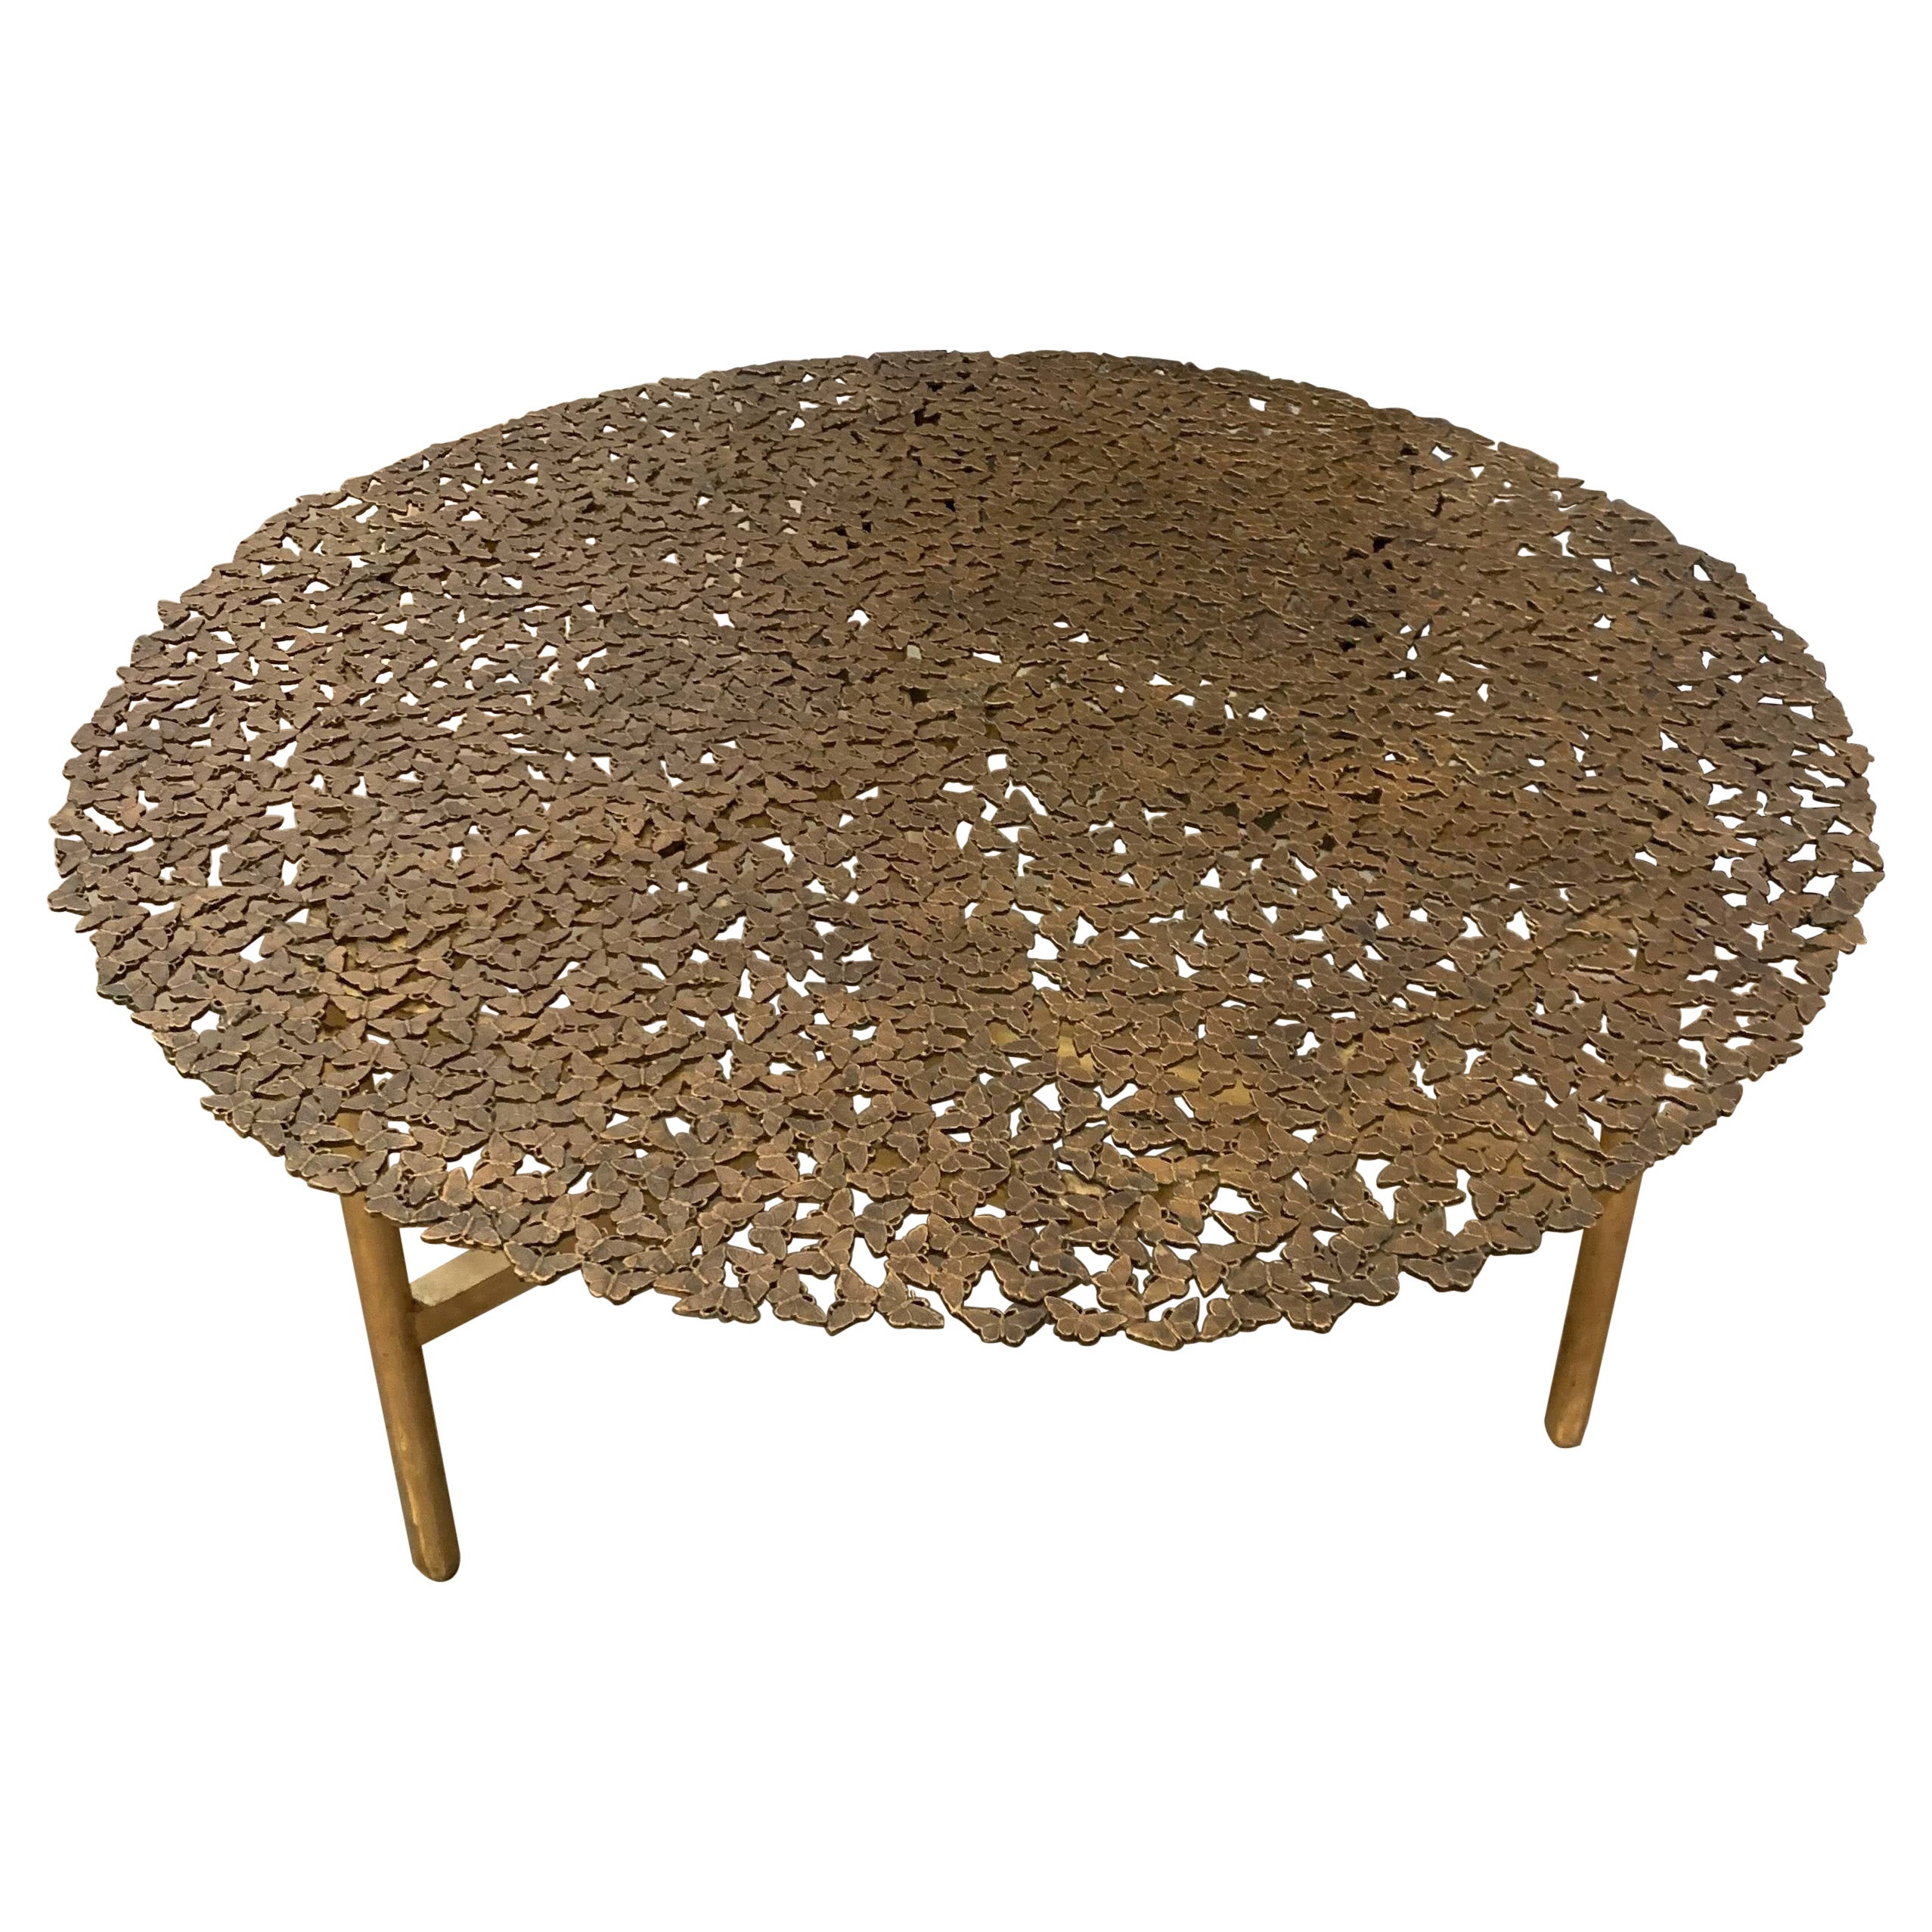 Jean Bronze Lost Wax Cast Butterfly Indoor or Outdoor Coffee Table by Fred&Juul